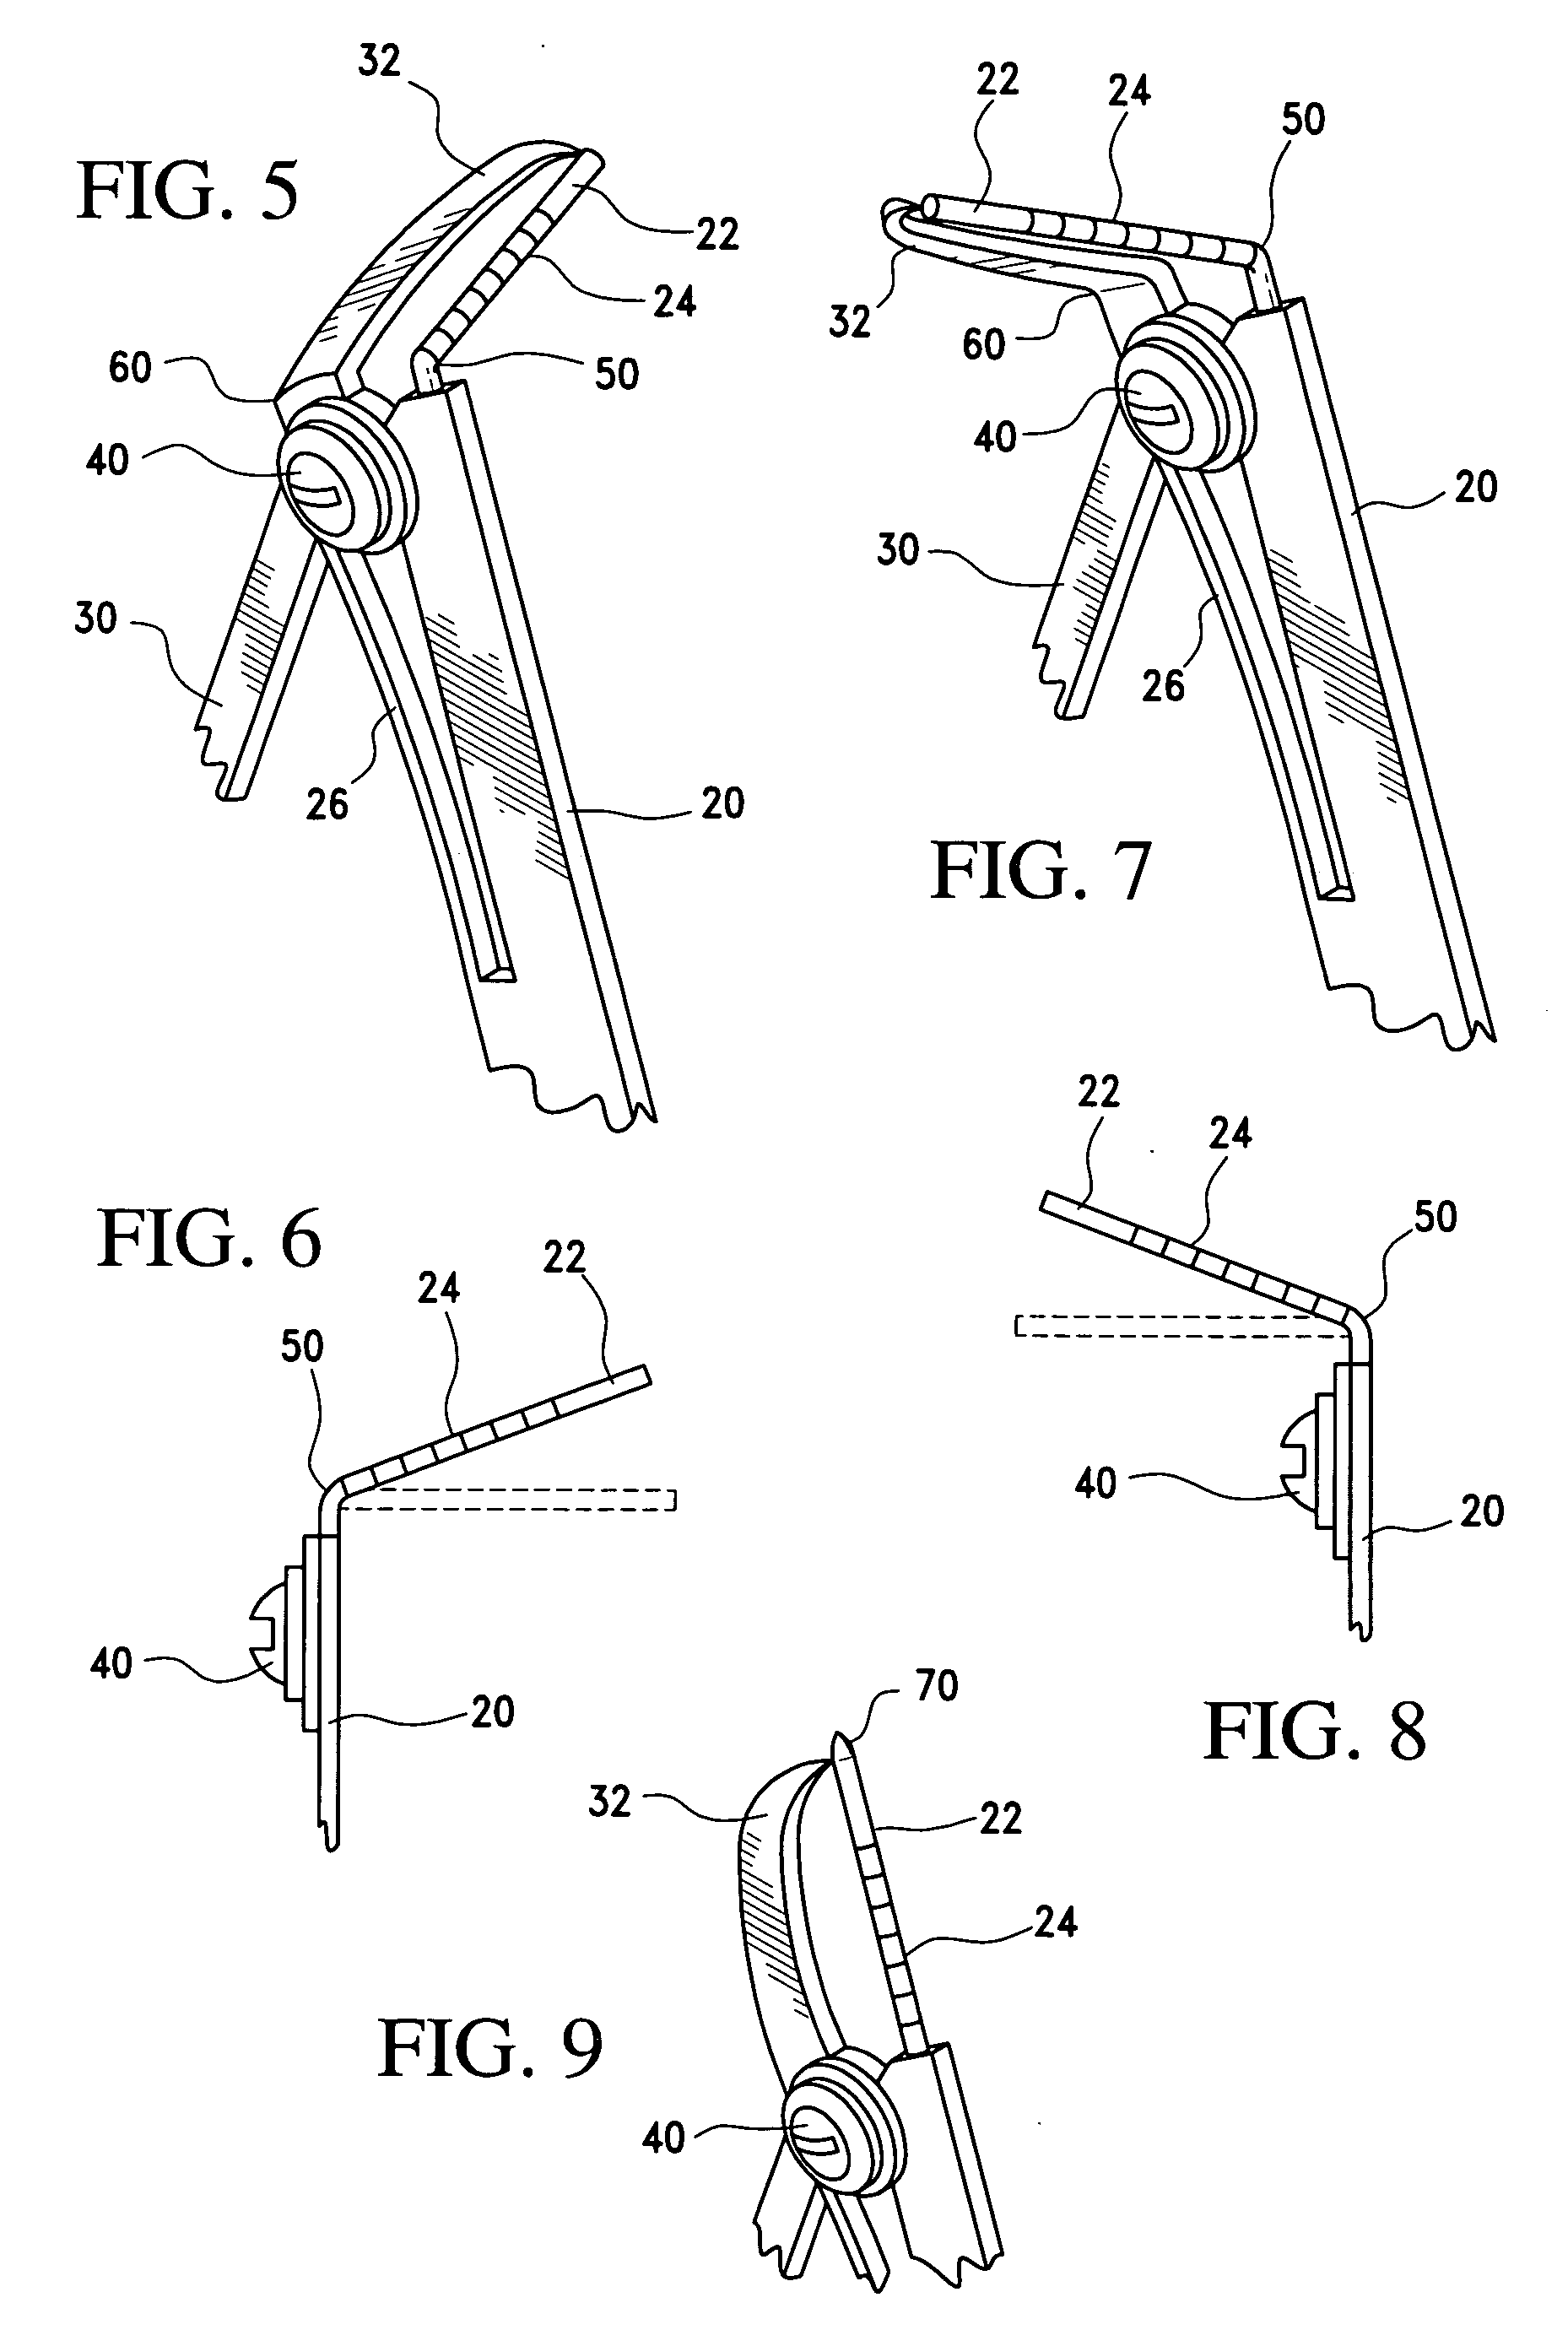 Bone measurement device for use during oral implant surgery